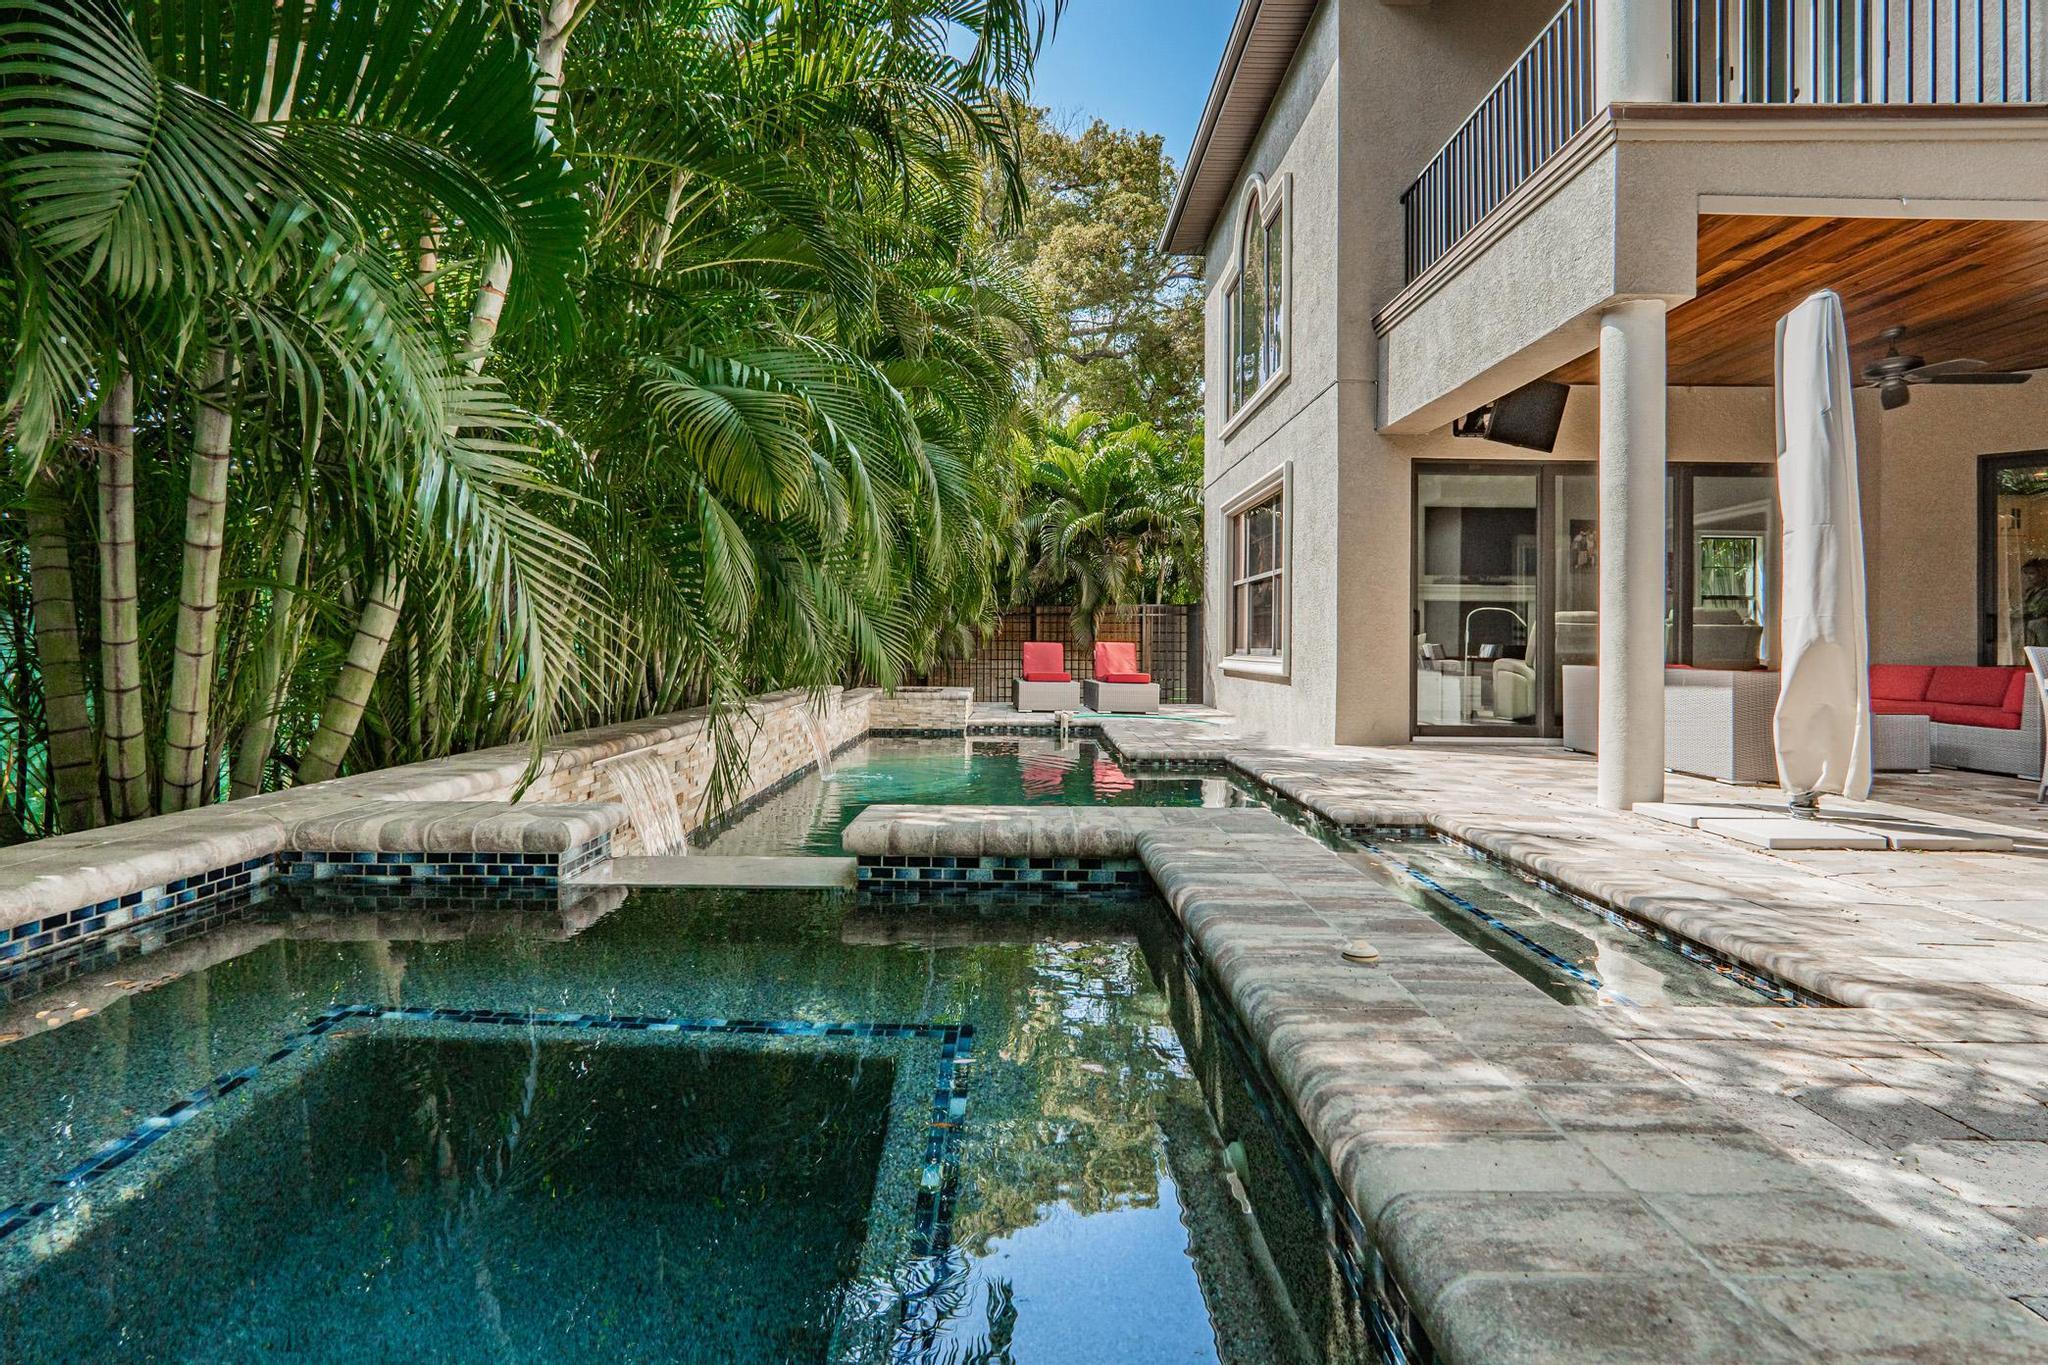 Lush landscaped pool at 2906 West Hawthorne Road. Palm trees and lush greens hang near and shade a blue pool and spa in the backyard next to a tall, gated home.